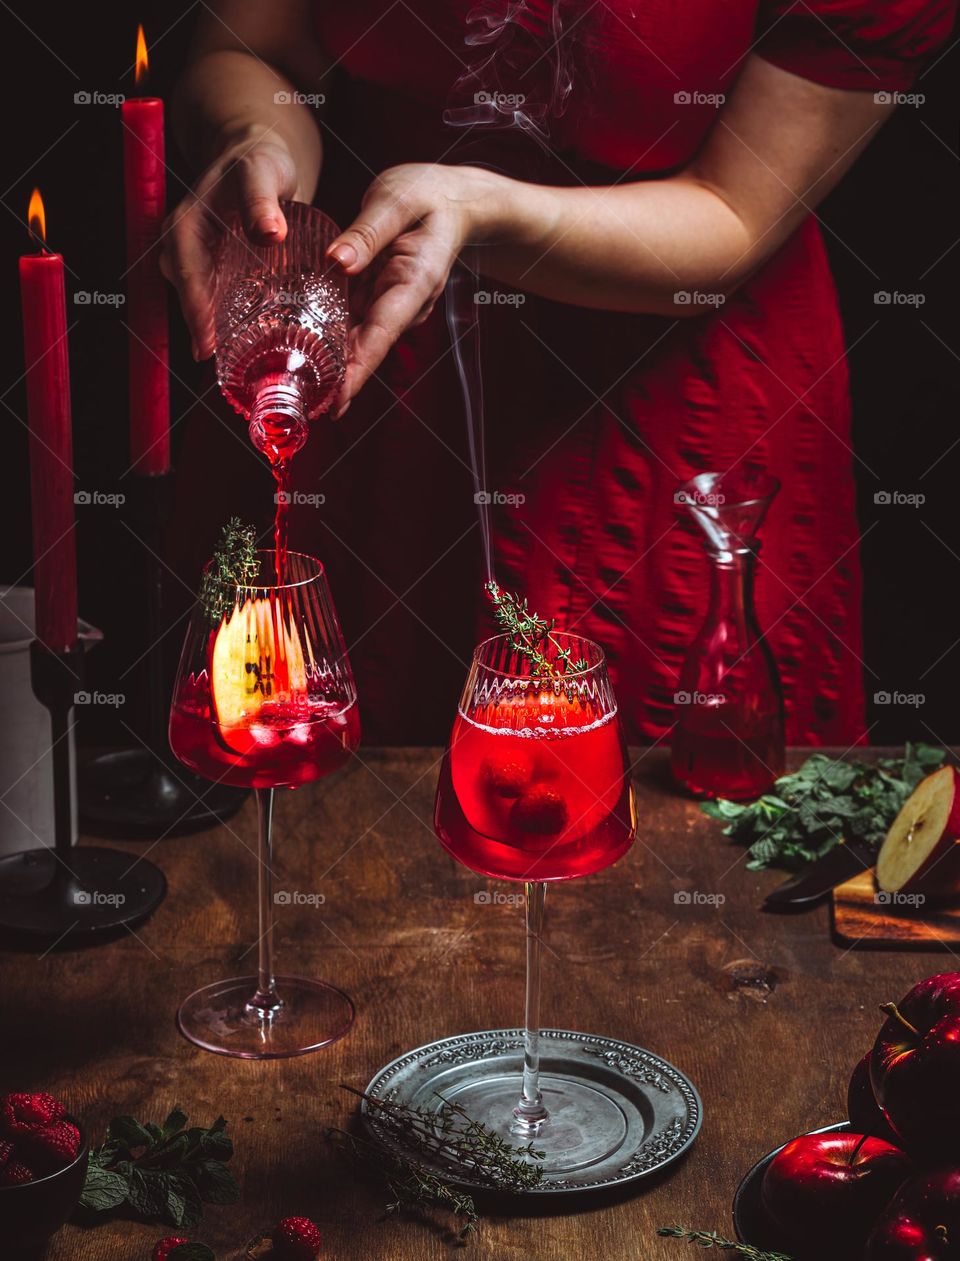 woman is preparing alcoholic drink in red colour